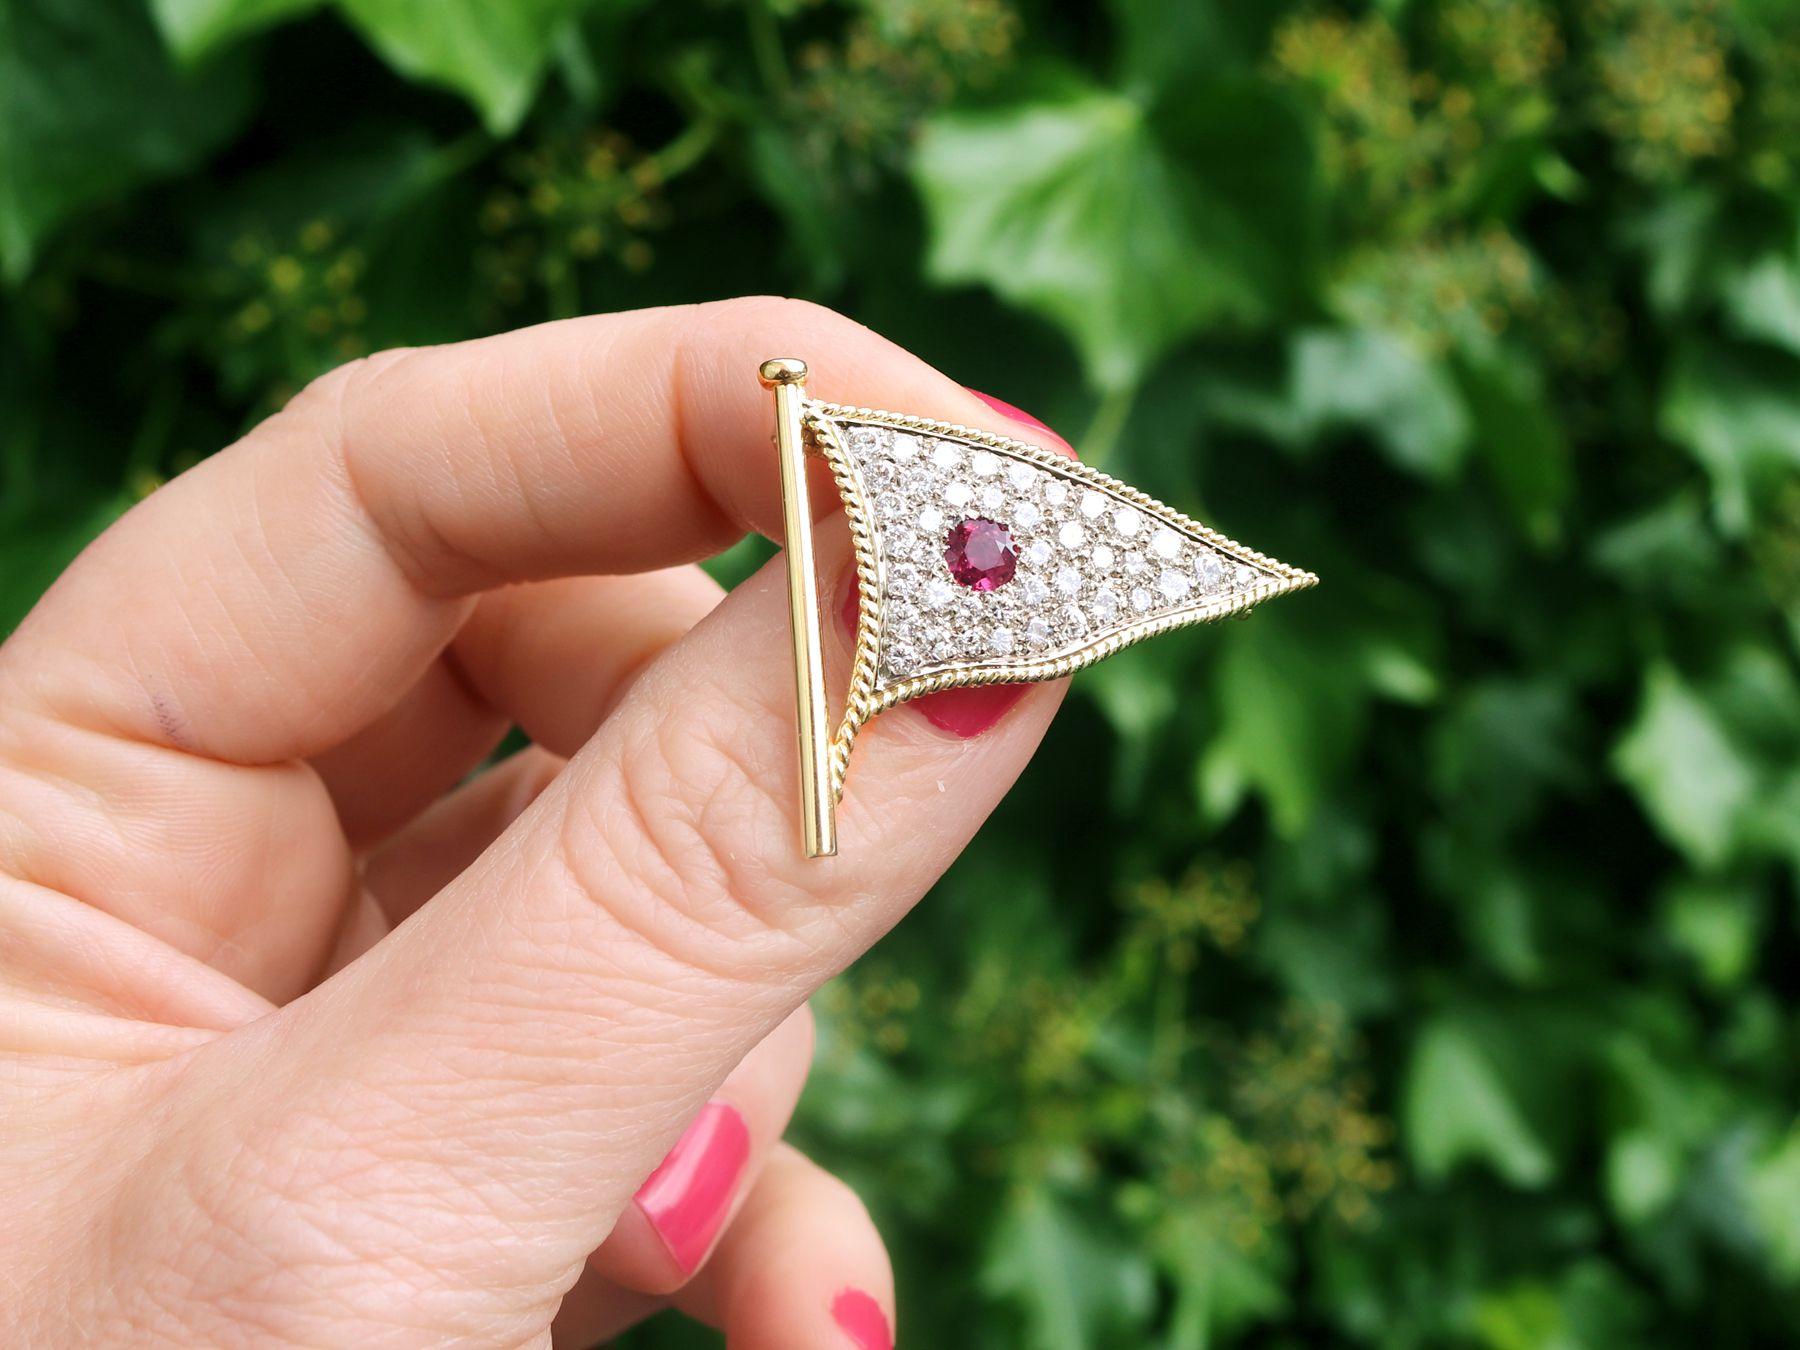 A stunning, fine and impressive vintage 1.65 carat diamond and 0.48 carat ruby, 18 karat yellow gold and 18k white gold set flag brooch; part of our diverse diamond jewellery and estate jewelry collections.

This stunning vintage brooch has been